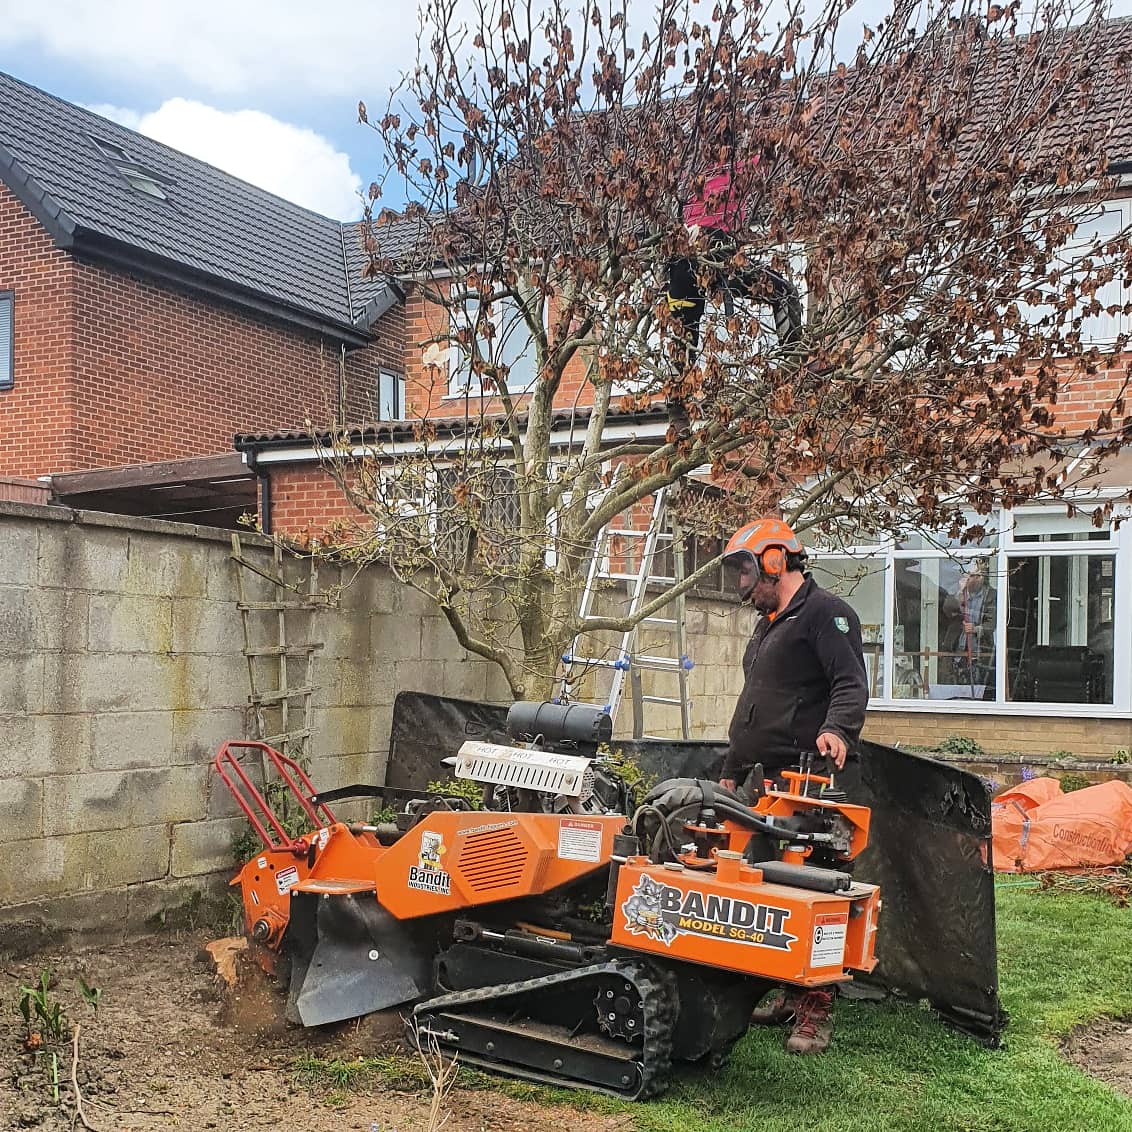 Up above and down below!
Stumps being ground out by Adam with the Bandit SG-40 stump grinder 🦝
The future flowerbeds can thrive obstacle free! 

#stumpgrinding #stumpgrinder #bandit @bandit_europe @bandittreeequipment @banditchippers #treework #treecare #treesurgeon